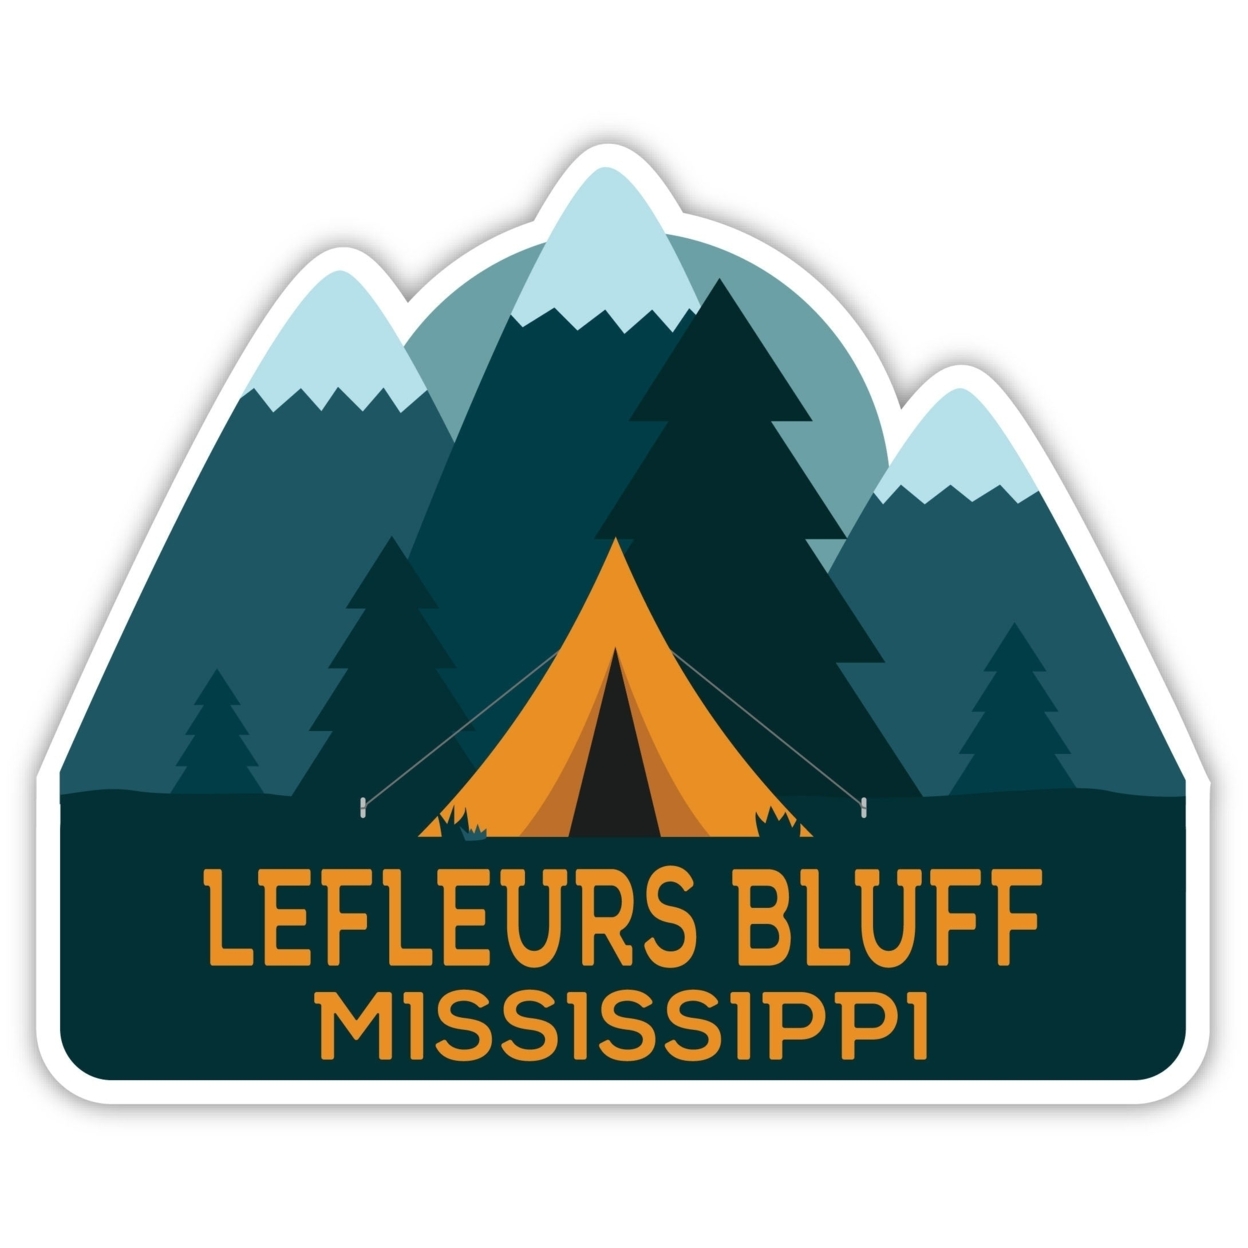 Lefleurs Bluff Mississippi Souvenir Decorative Stickers (Choose Theme And Size) - 4-Inch, Tent